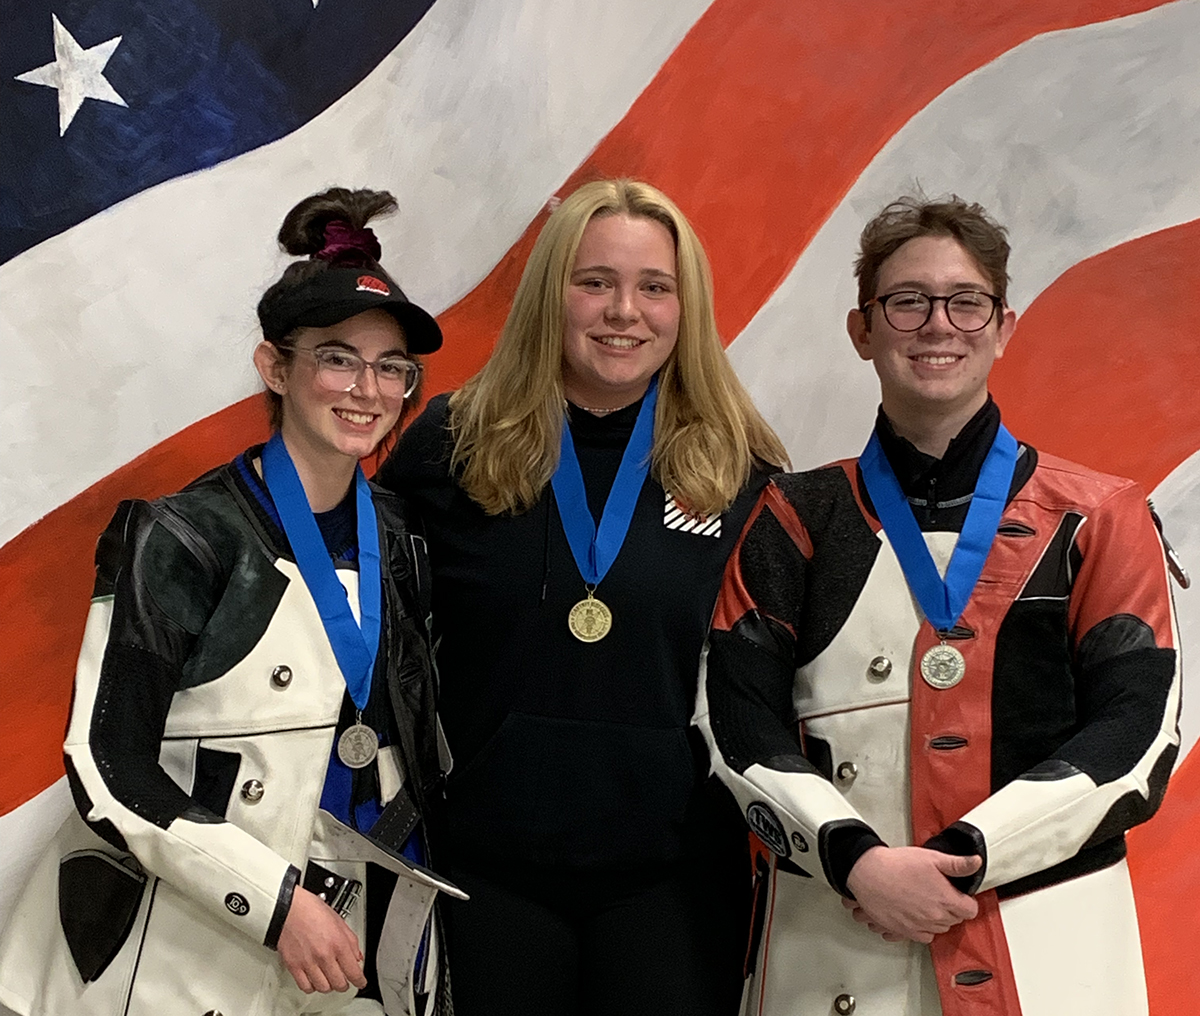 In Port Clinton, the 60 Shot Rifle medal winners included Hailey Singleton, Katrina Demerle and Dylan Gregory.